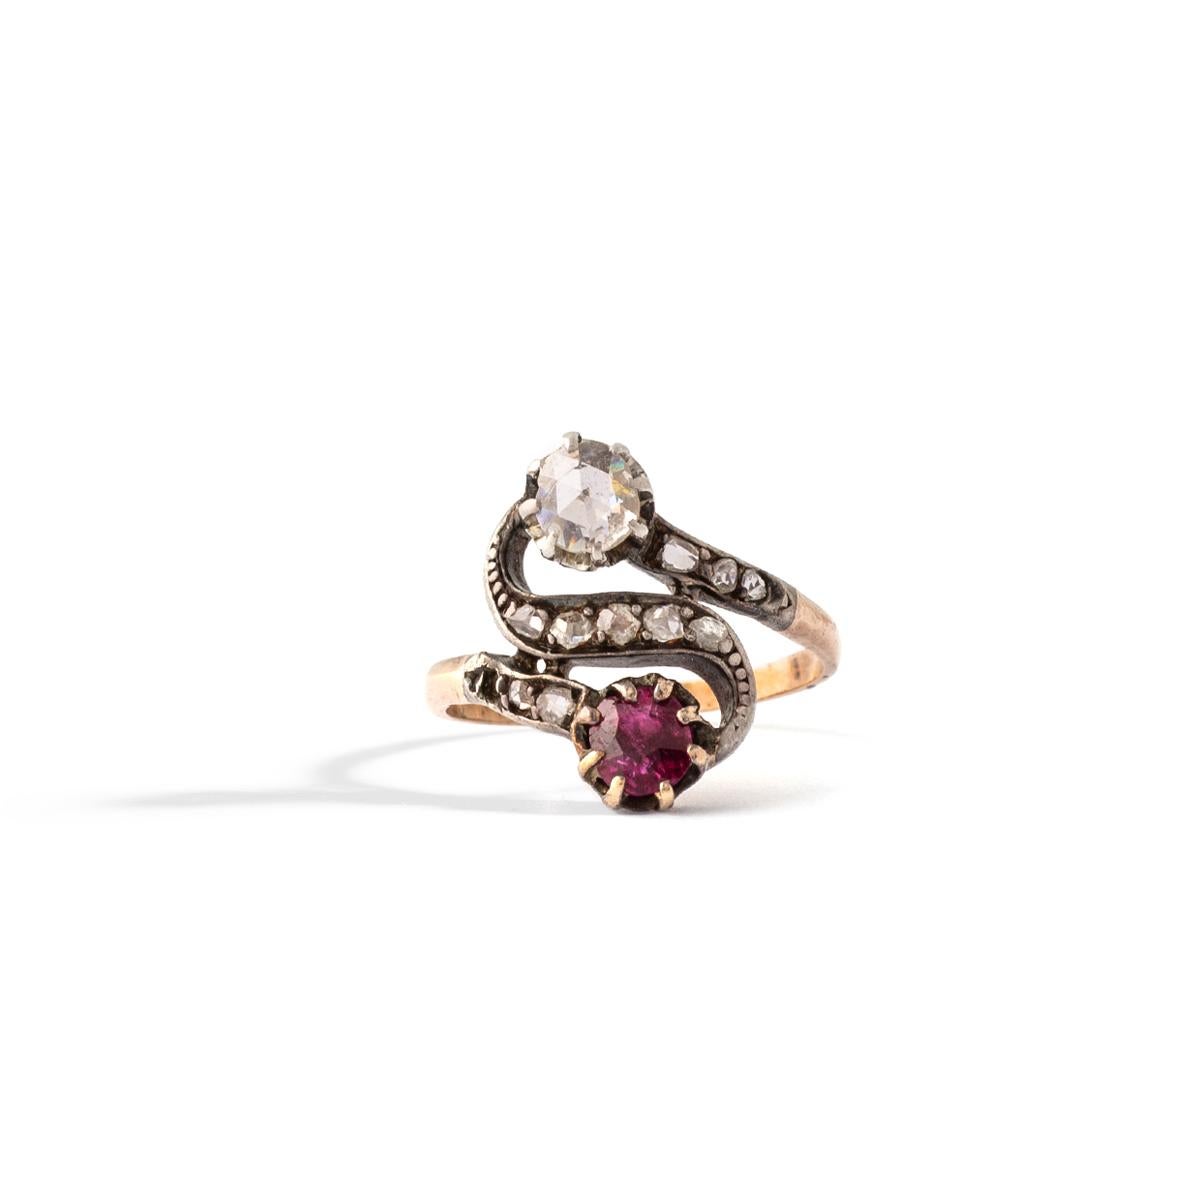 Antique Crossover Ruby natural non heated and Rose cut Diamond on silver and gold Ring.
Rose cut Diamond Diameter: Approximately 5.05 millimeters.
Round cut Ruby Diameter: Approximately 5.05 millimeters.
Ring Size: 6 1/4.
Gross weight: 3.12 grams